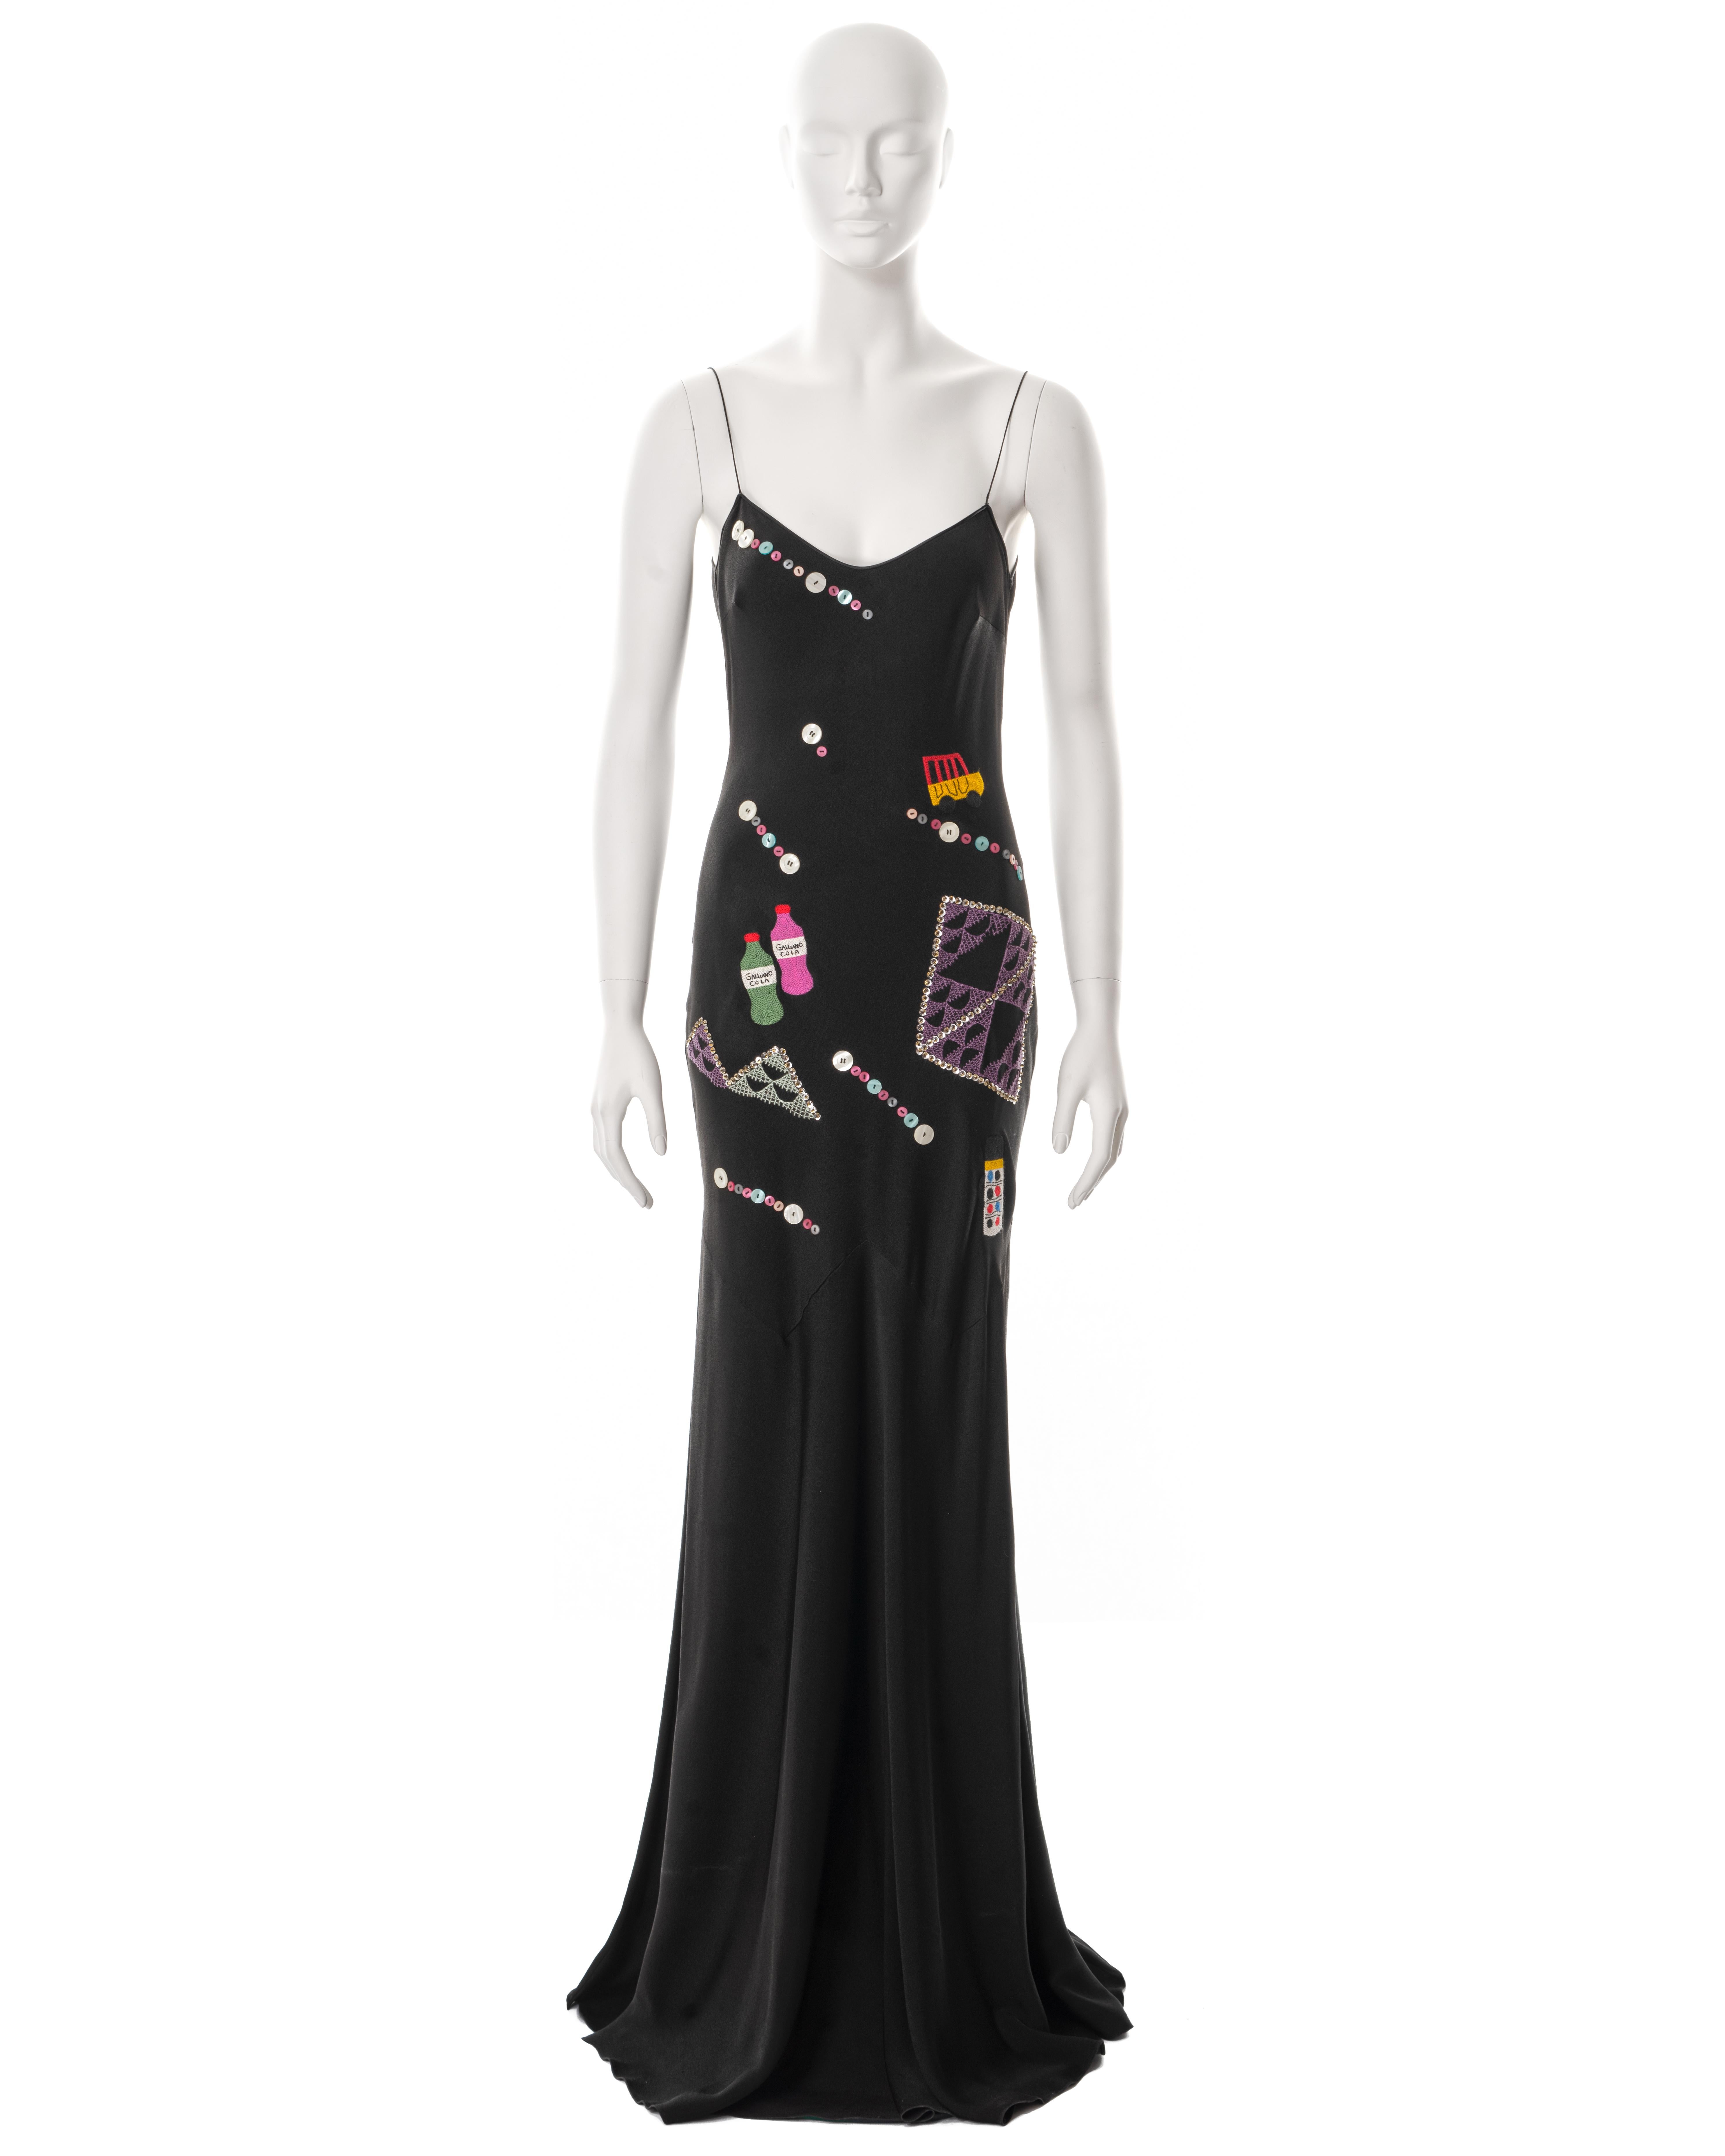 ▪ John Galliano black evening dress
▪ Sold by One of a Kind Archive
▪ Fall-Winter 2004
▪ Constructed from bias-cut acetate-viscose crepe 
▪ Multi coloured novelty embroideries of 'Galliano Soda' bottles 
▪ Decorative buttons 
▪ Floor-length skirt